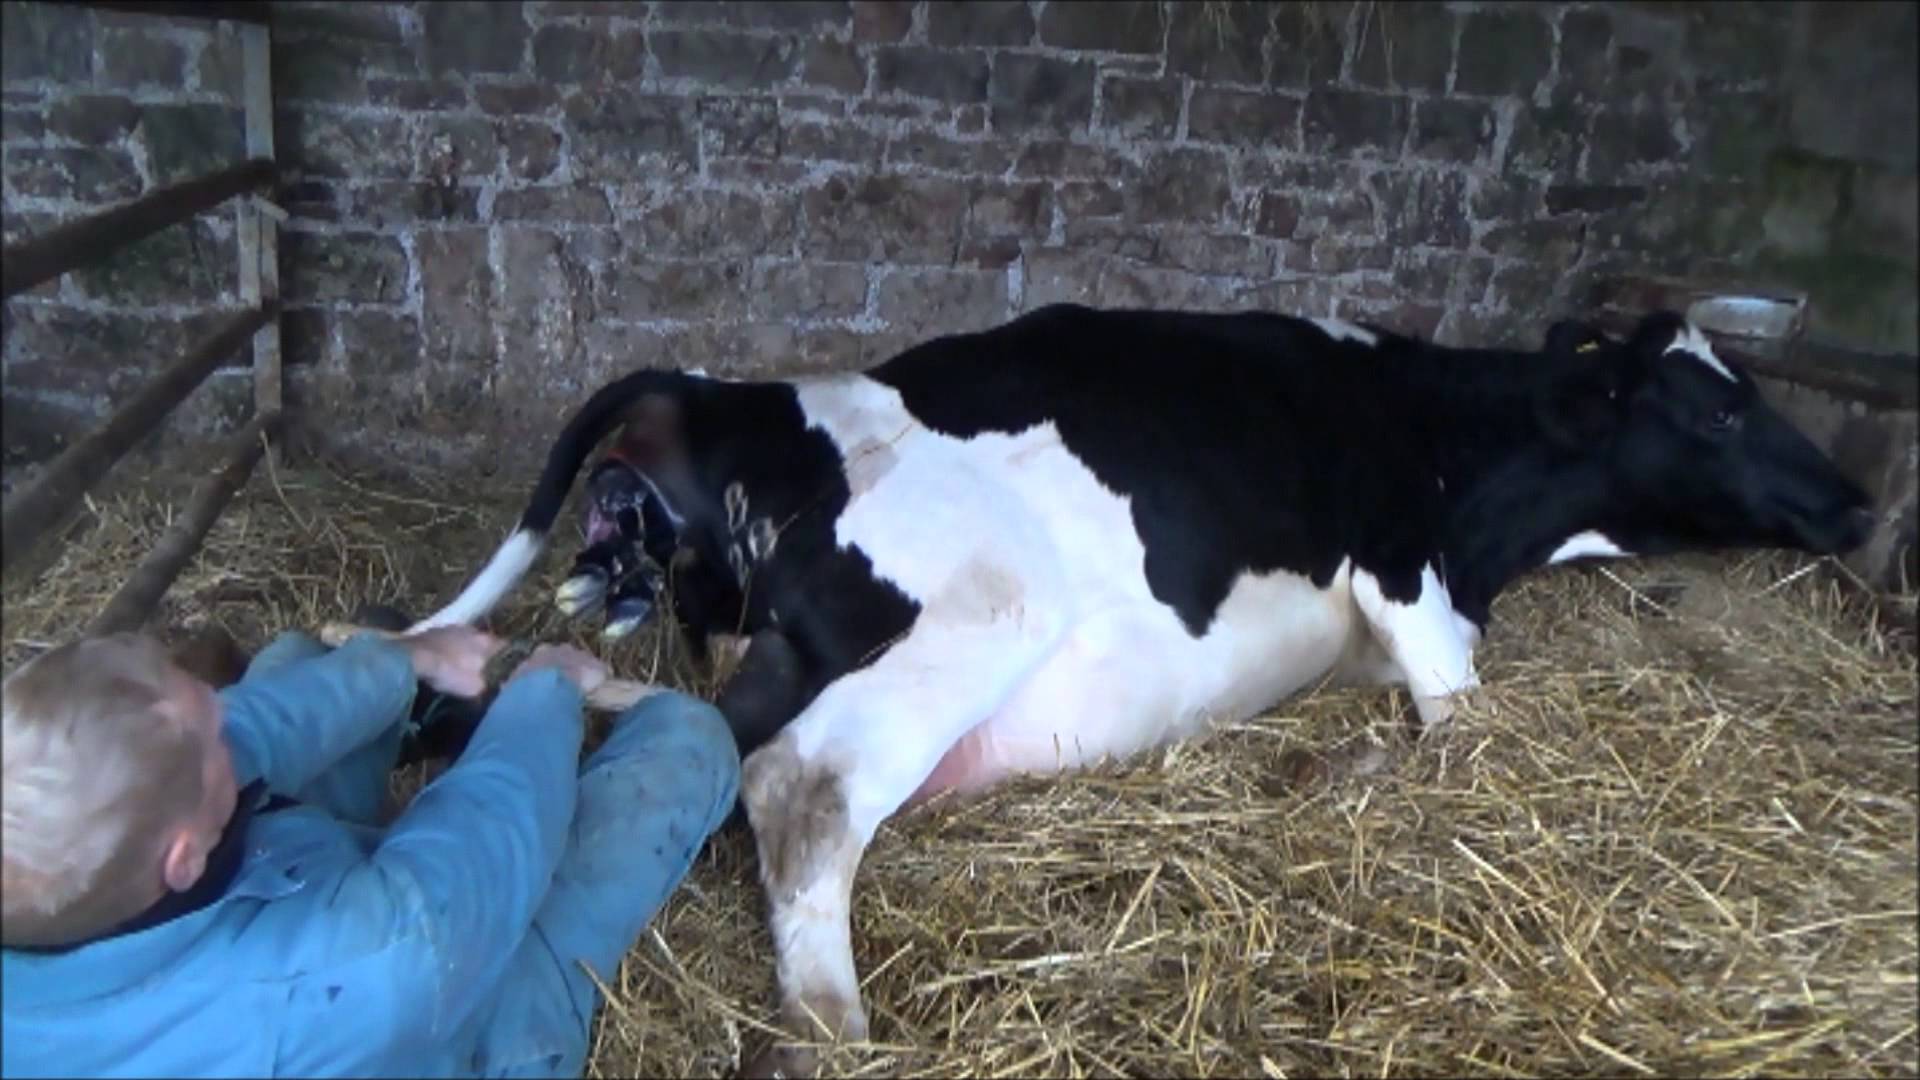 Pulling a calf out of a cow - YouTube